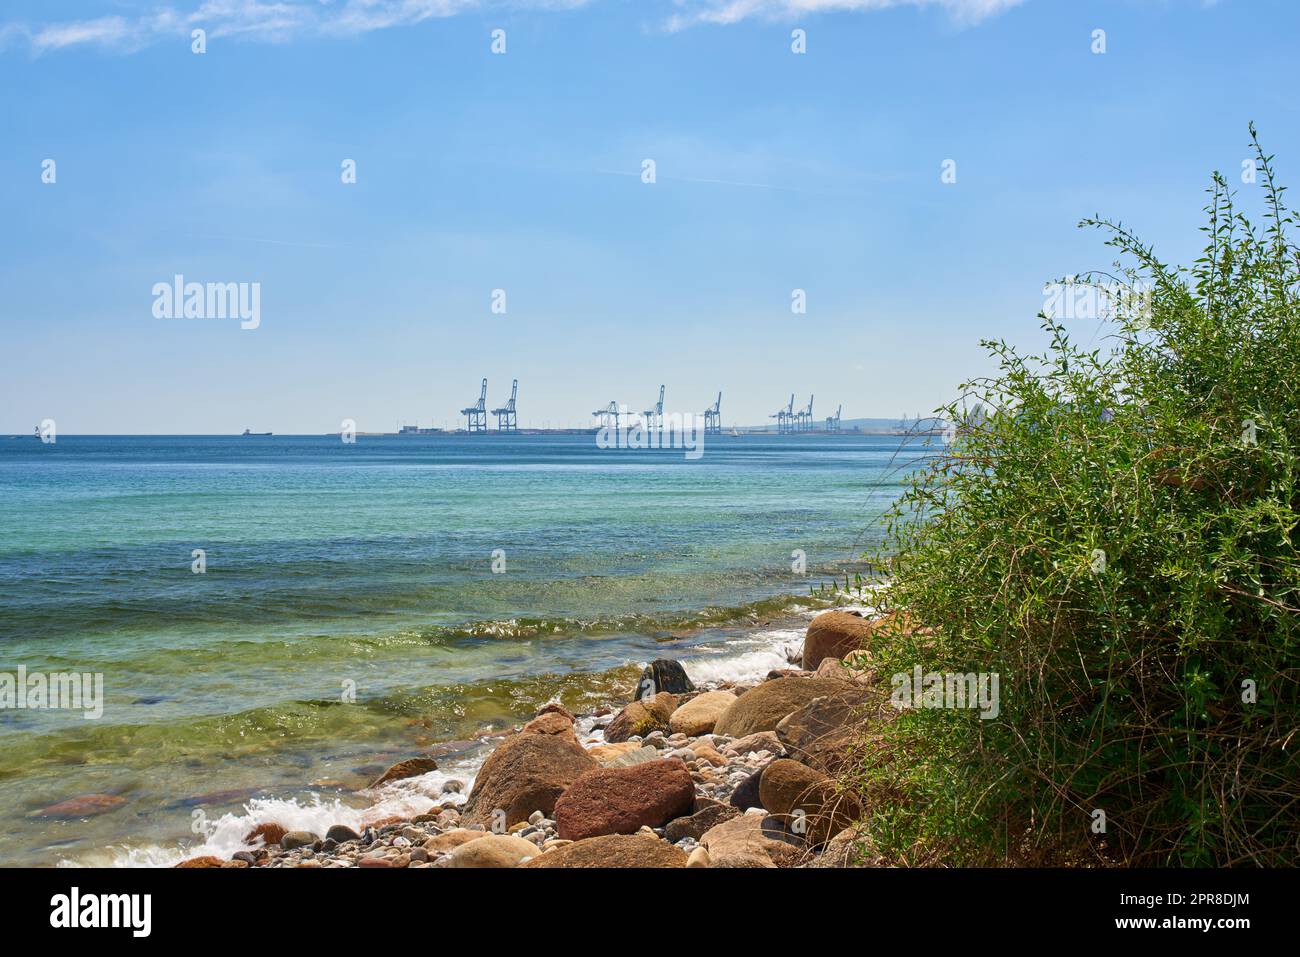 A shallow rocky coast on a calm quiet beach day during summer with grass growing on the shore. Scenic view of a crystal blue ocean with clear blue skies and white clouds during a warm summer day. Stock Photo